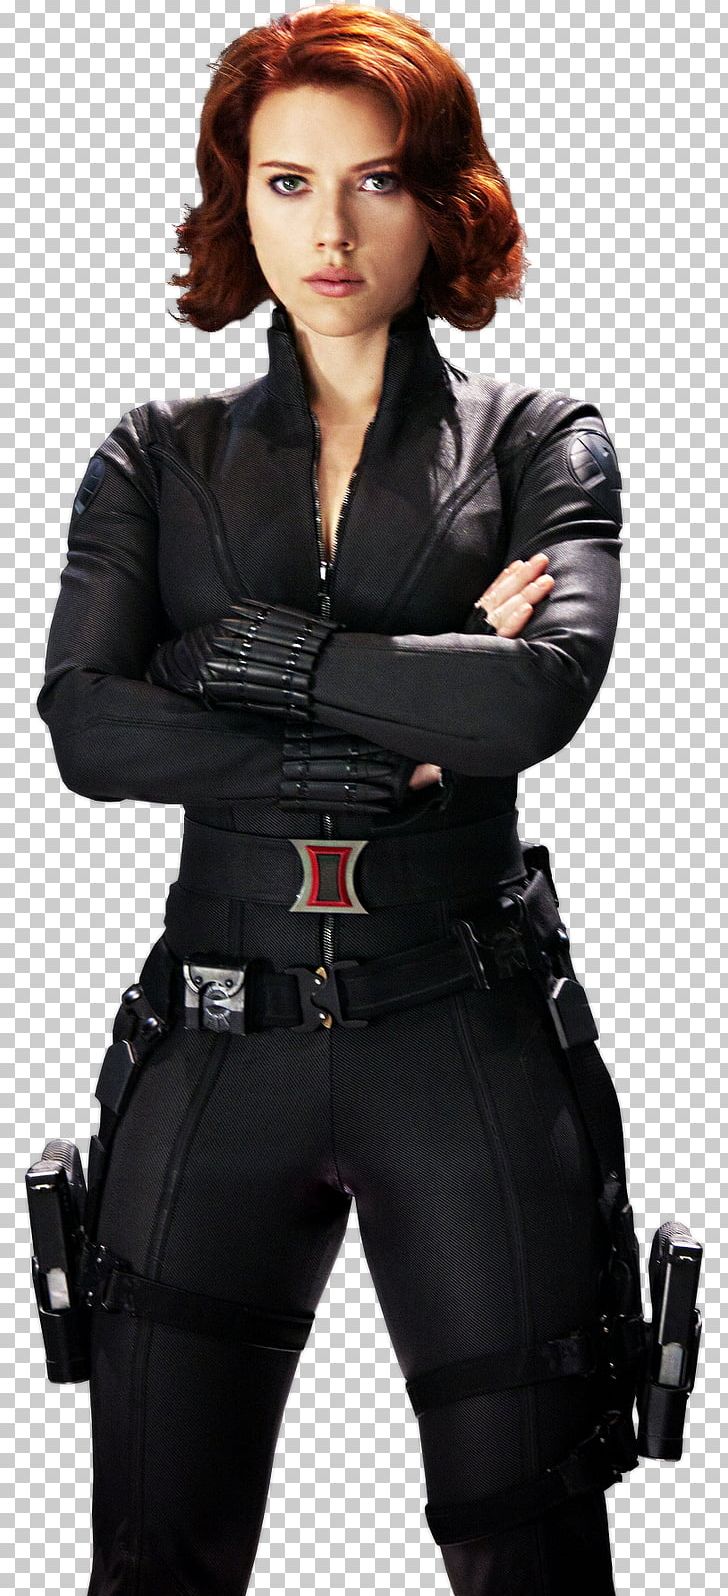 Scarlett Johansson Black Widow The Avengers Film PNG, Clipart, Avengers, Avengers Age Of Ultron, Black Widow, Captain America The Winter Soldier, Celebrities Free PNG Download